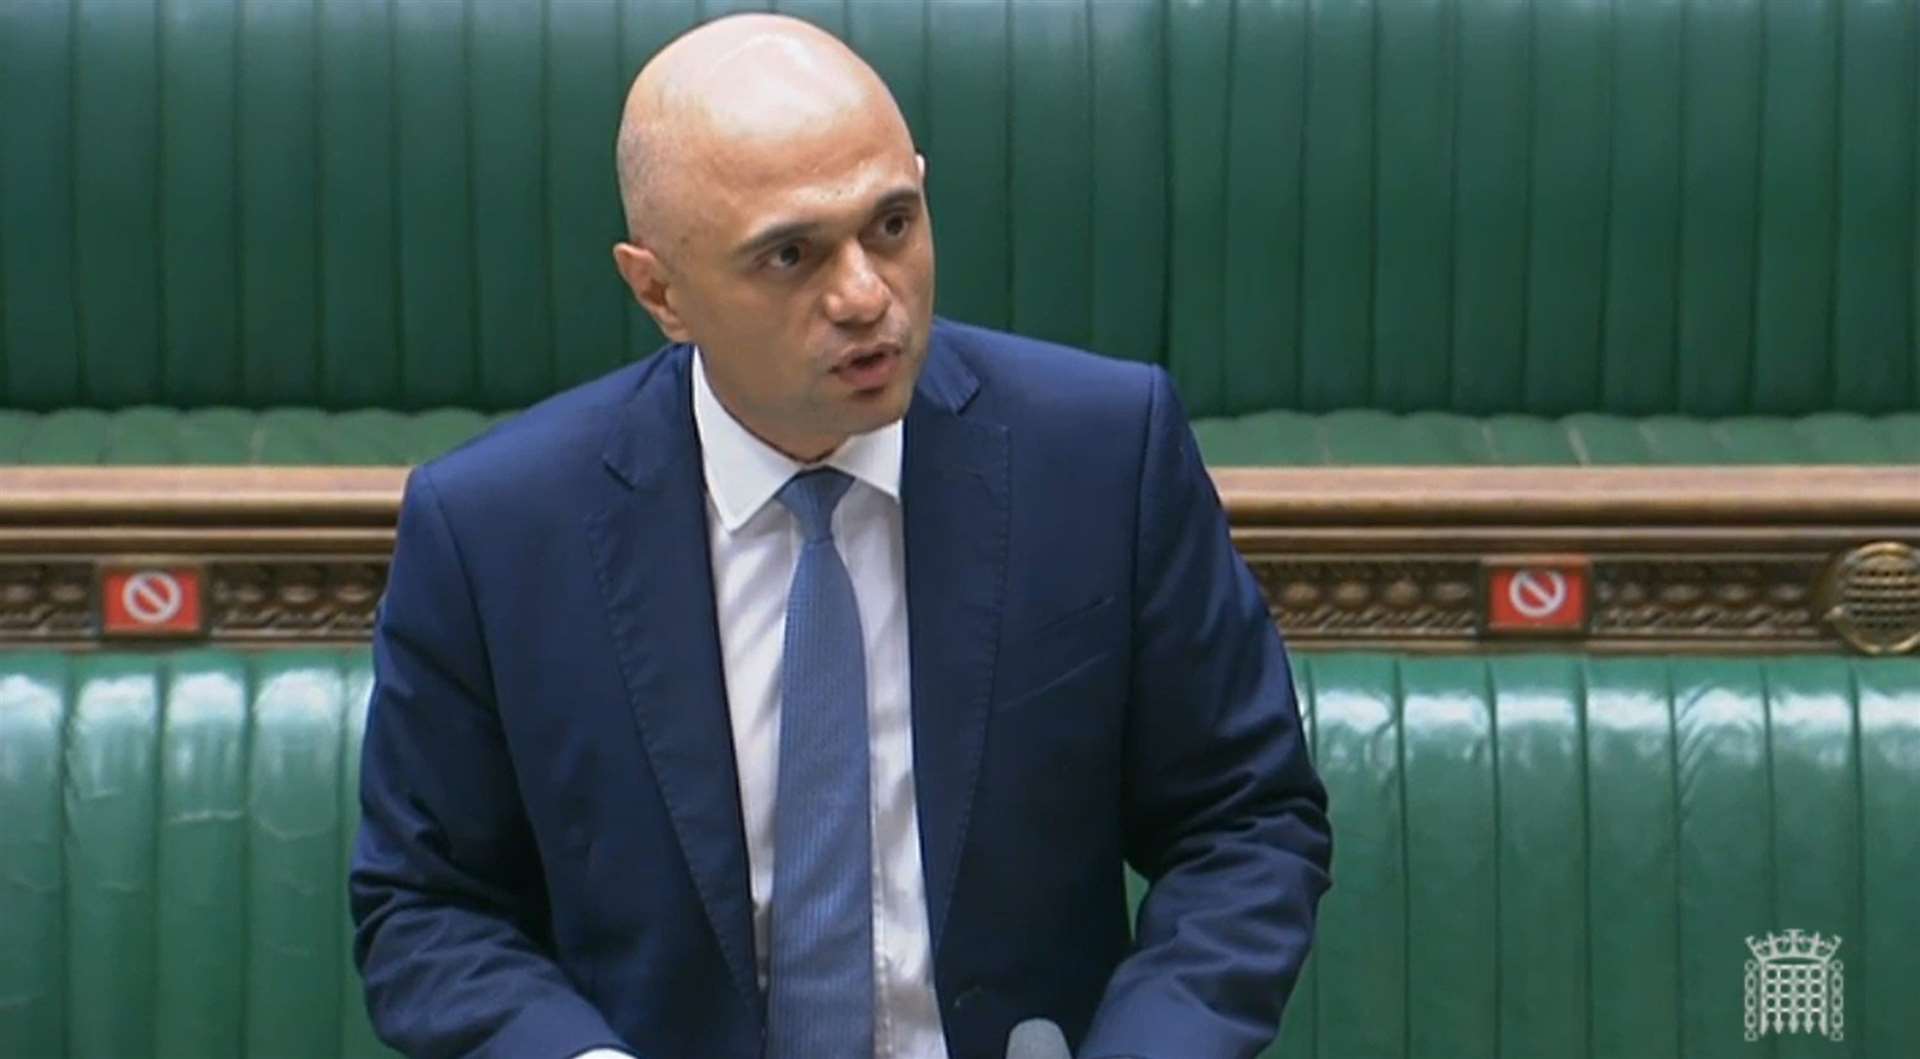 Sajid Javid has further reduced the self-isolation period